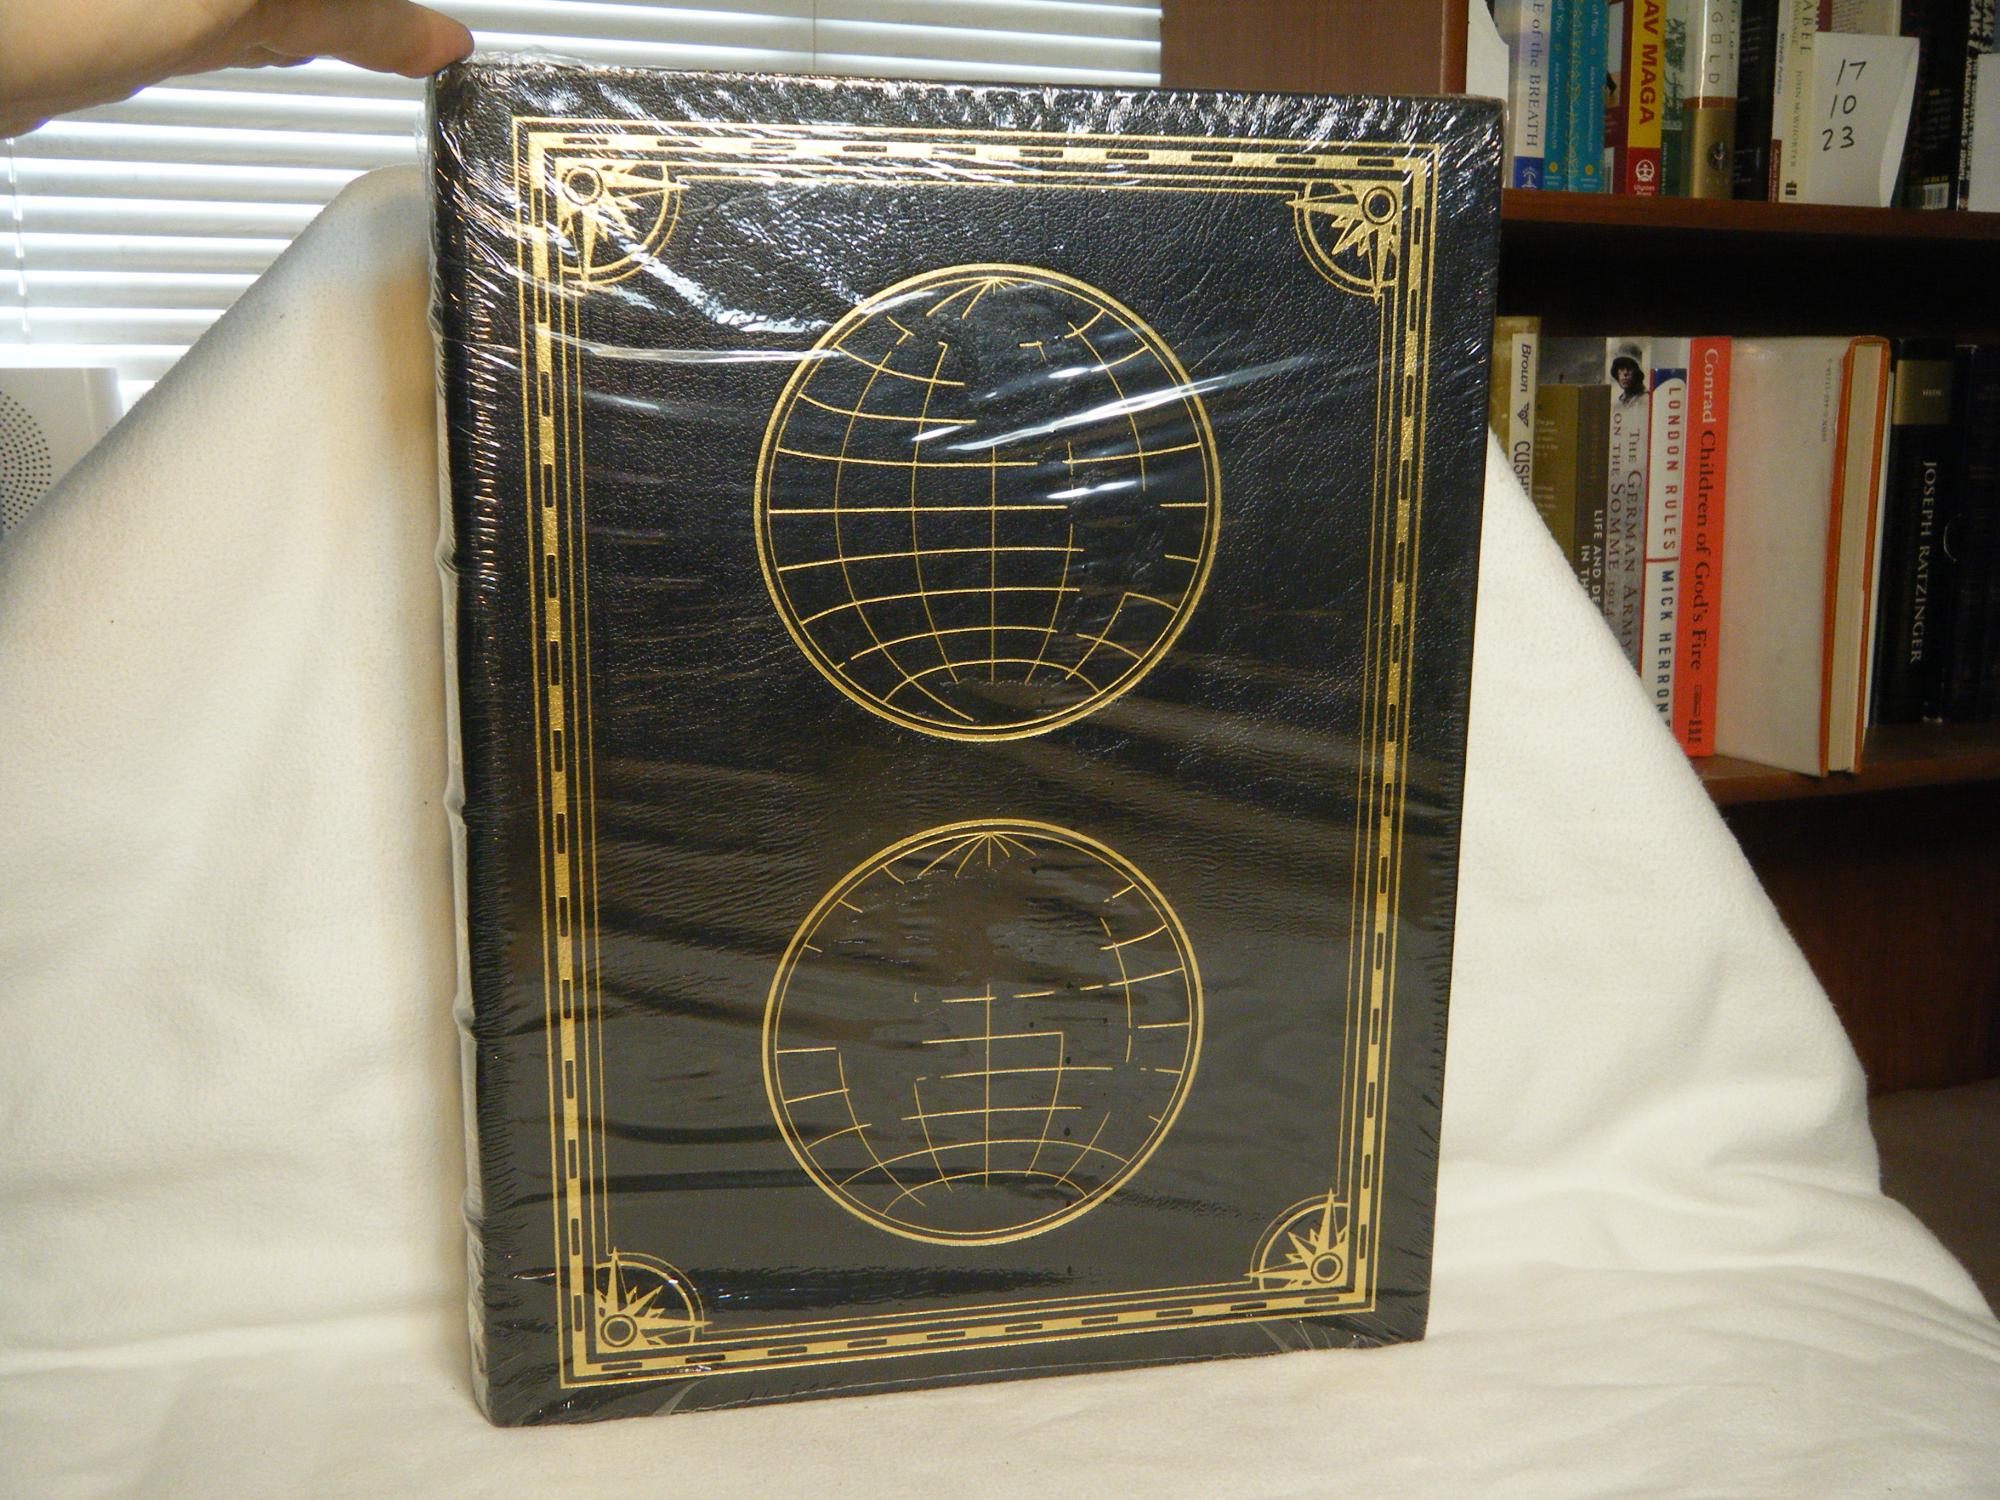 oxford-atlas-of-the-world-new-hardcover-2001-curtis-paul-books-inc